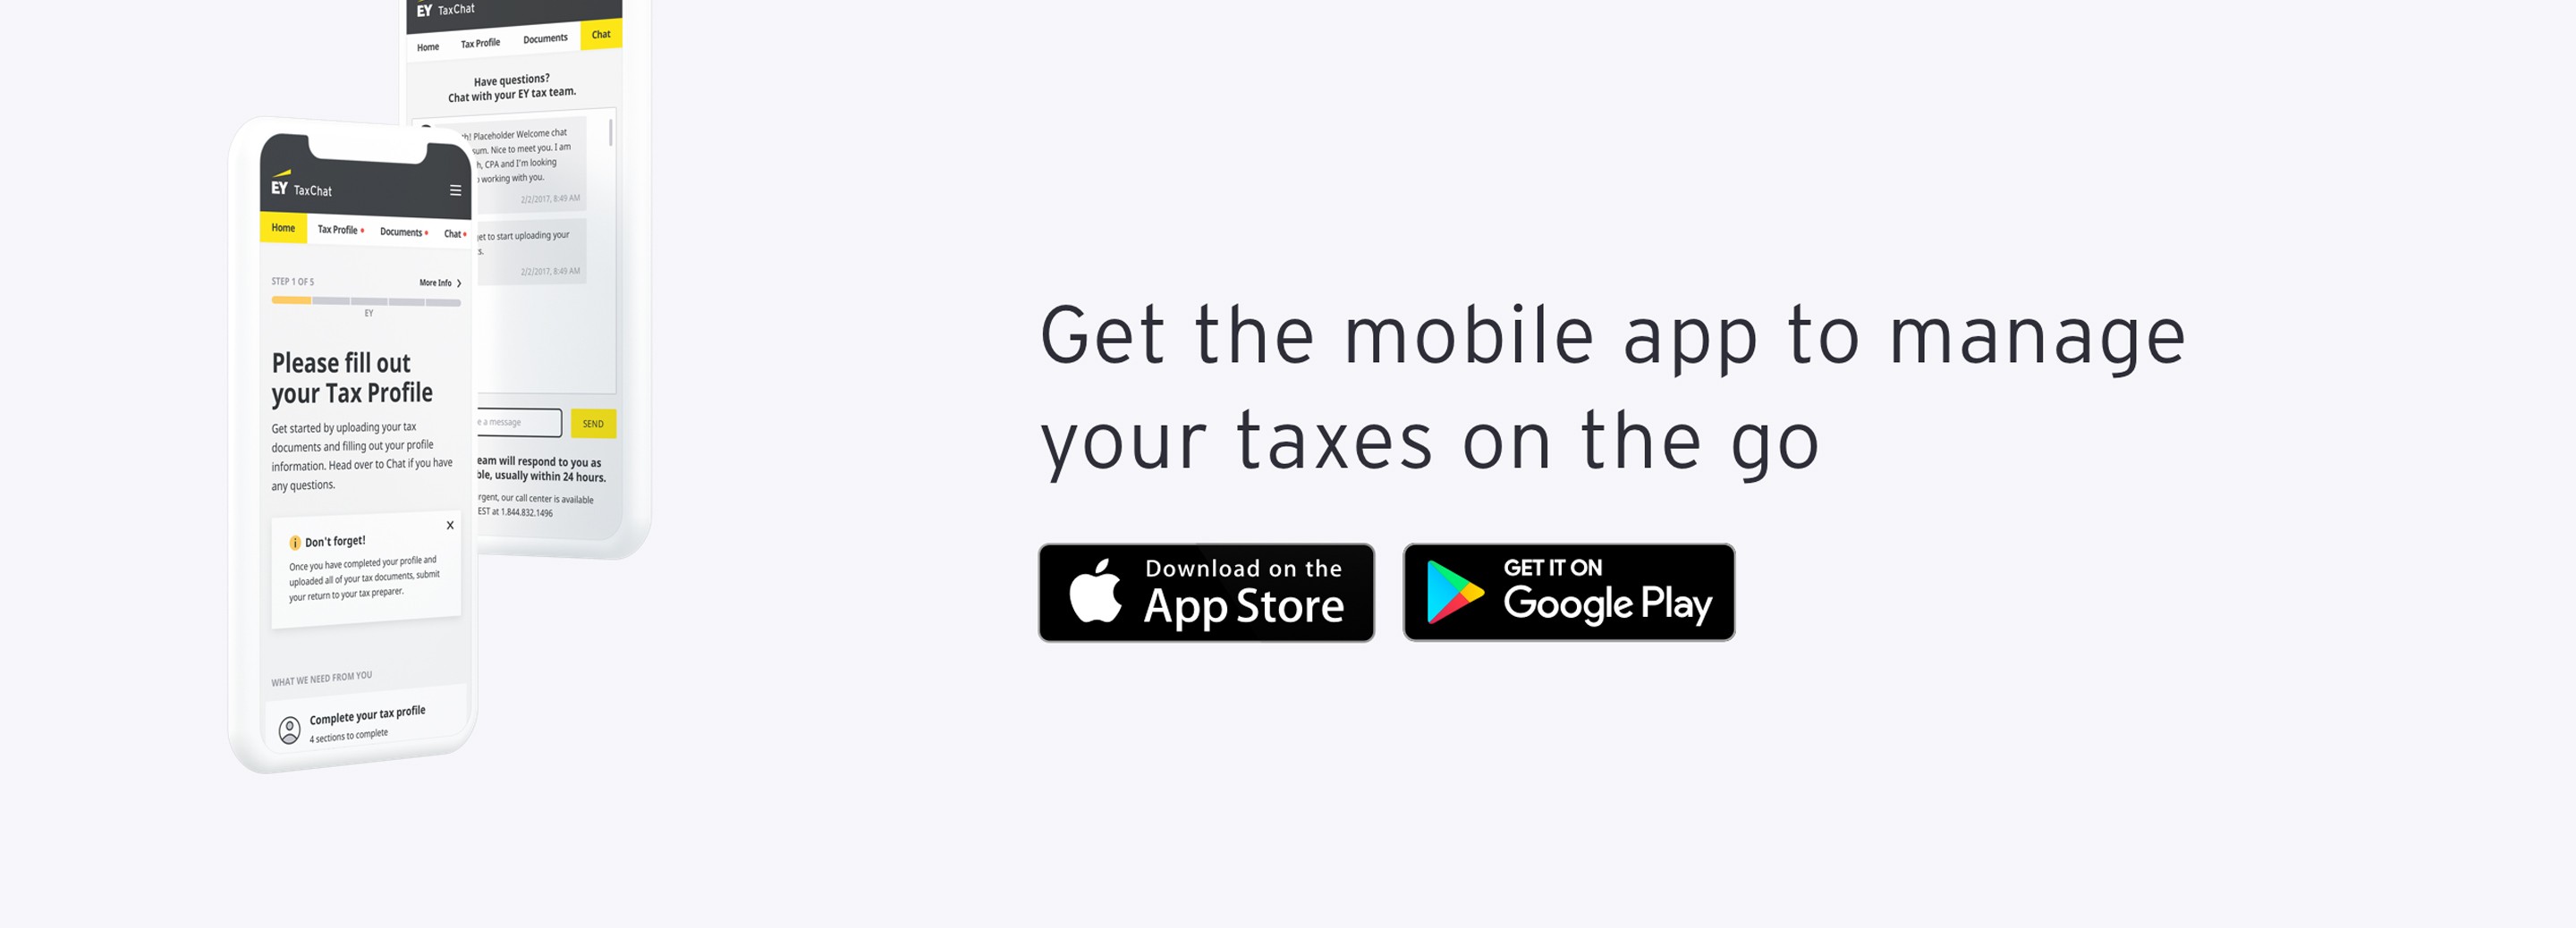 ey tax chat promo banner mobile